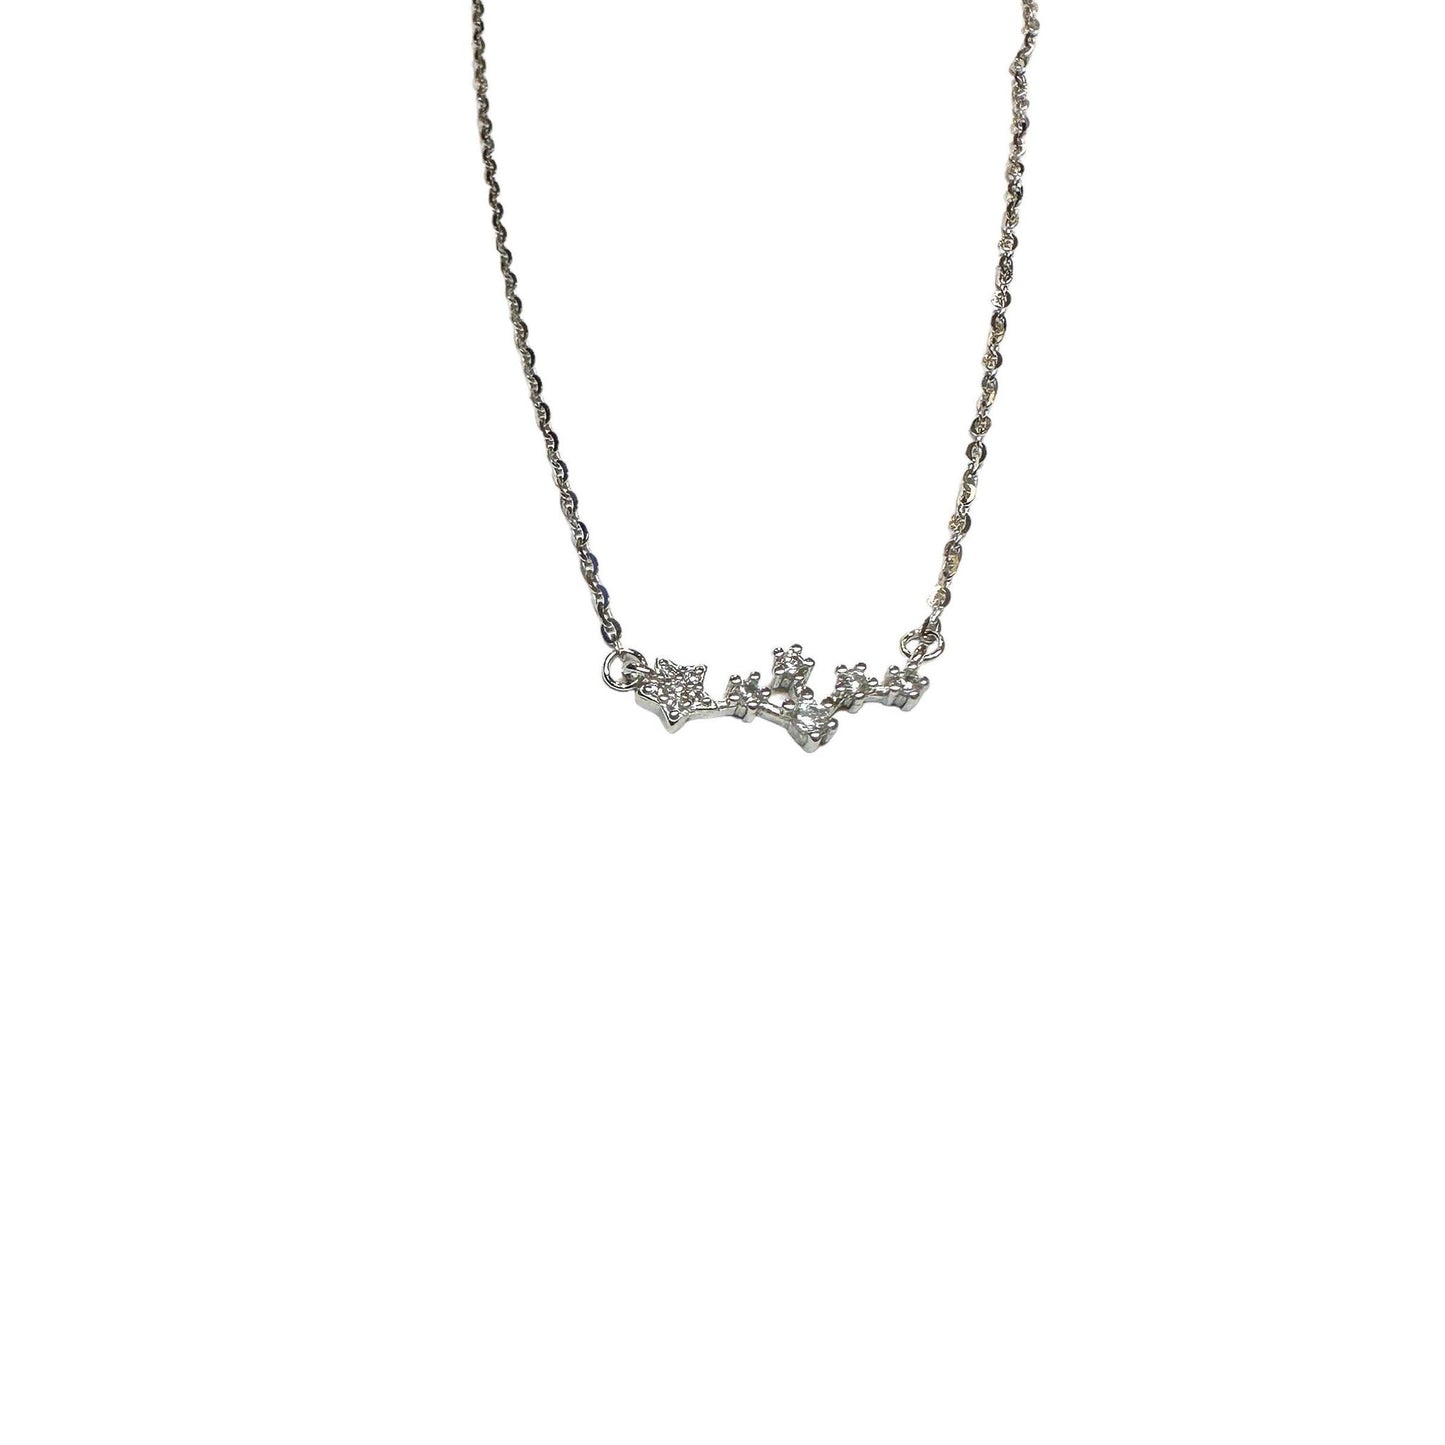 Stars on the chain Silver Necklace